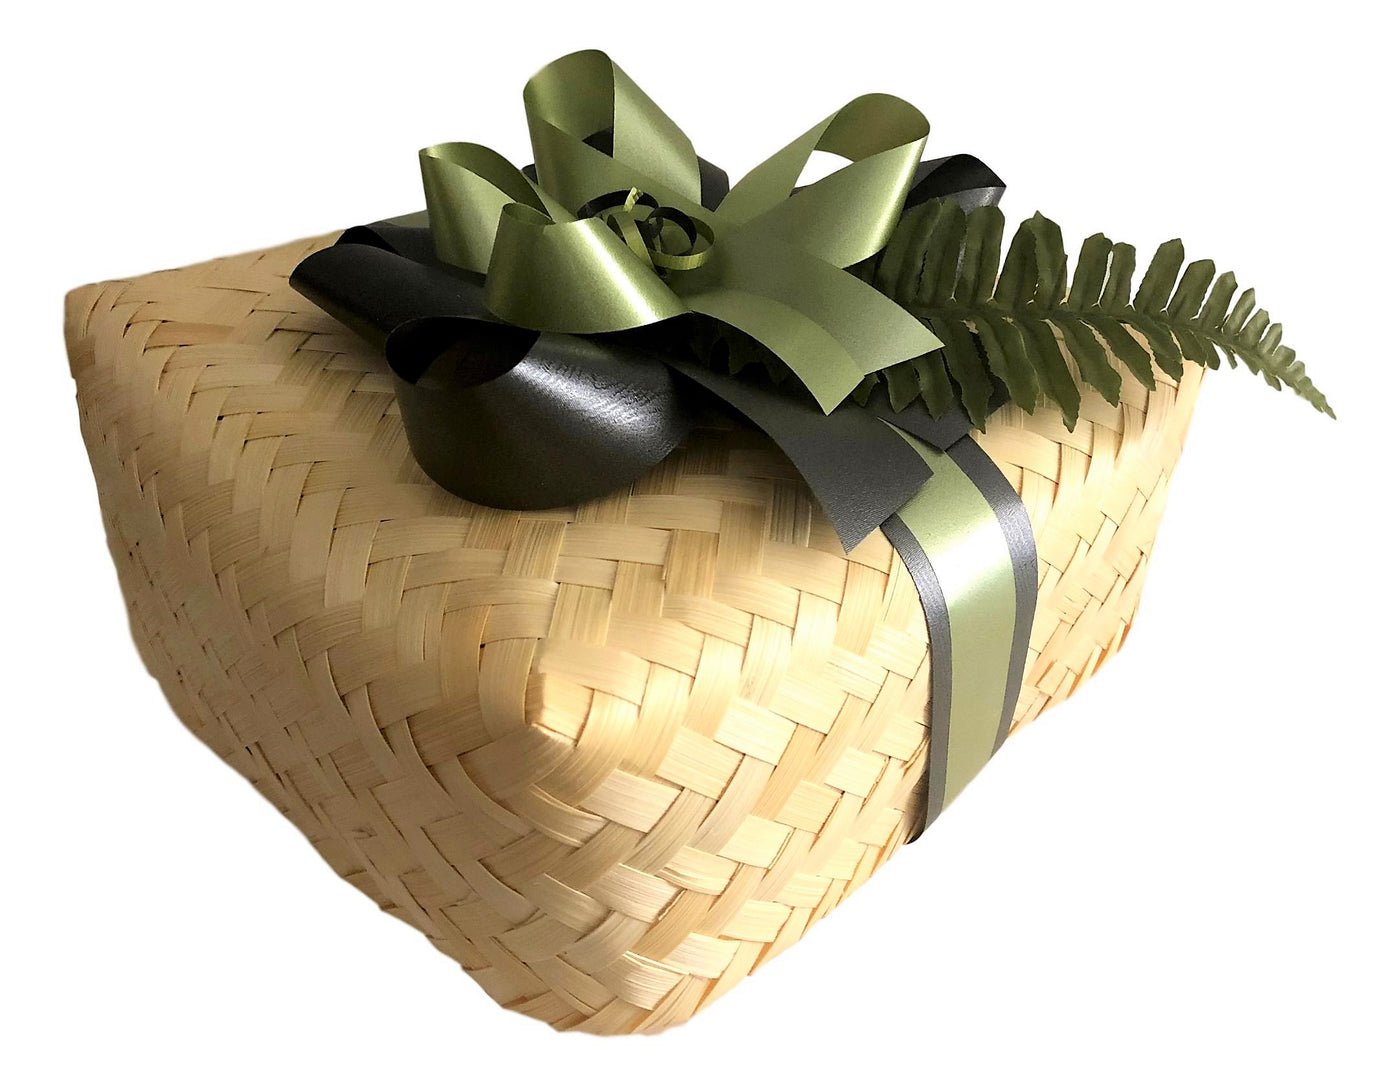 Gourmet gift hampers and gift baskets - Basket Creations NZ